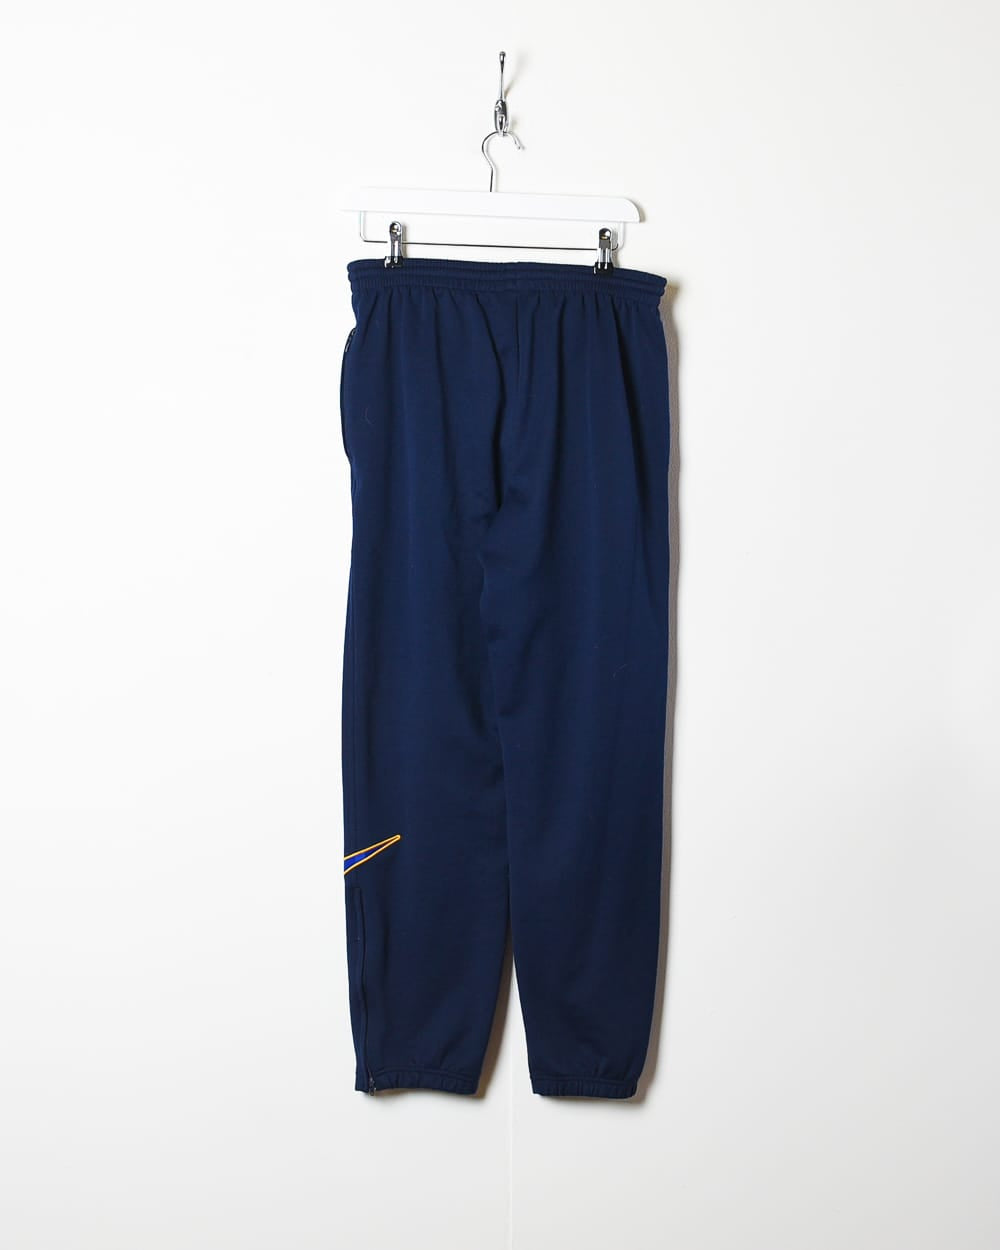 Navy Nike Tracksuit Bottoms - Small